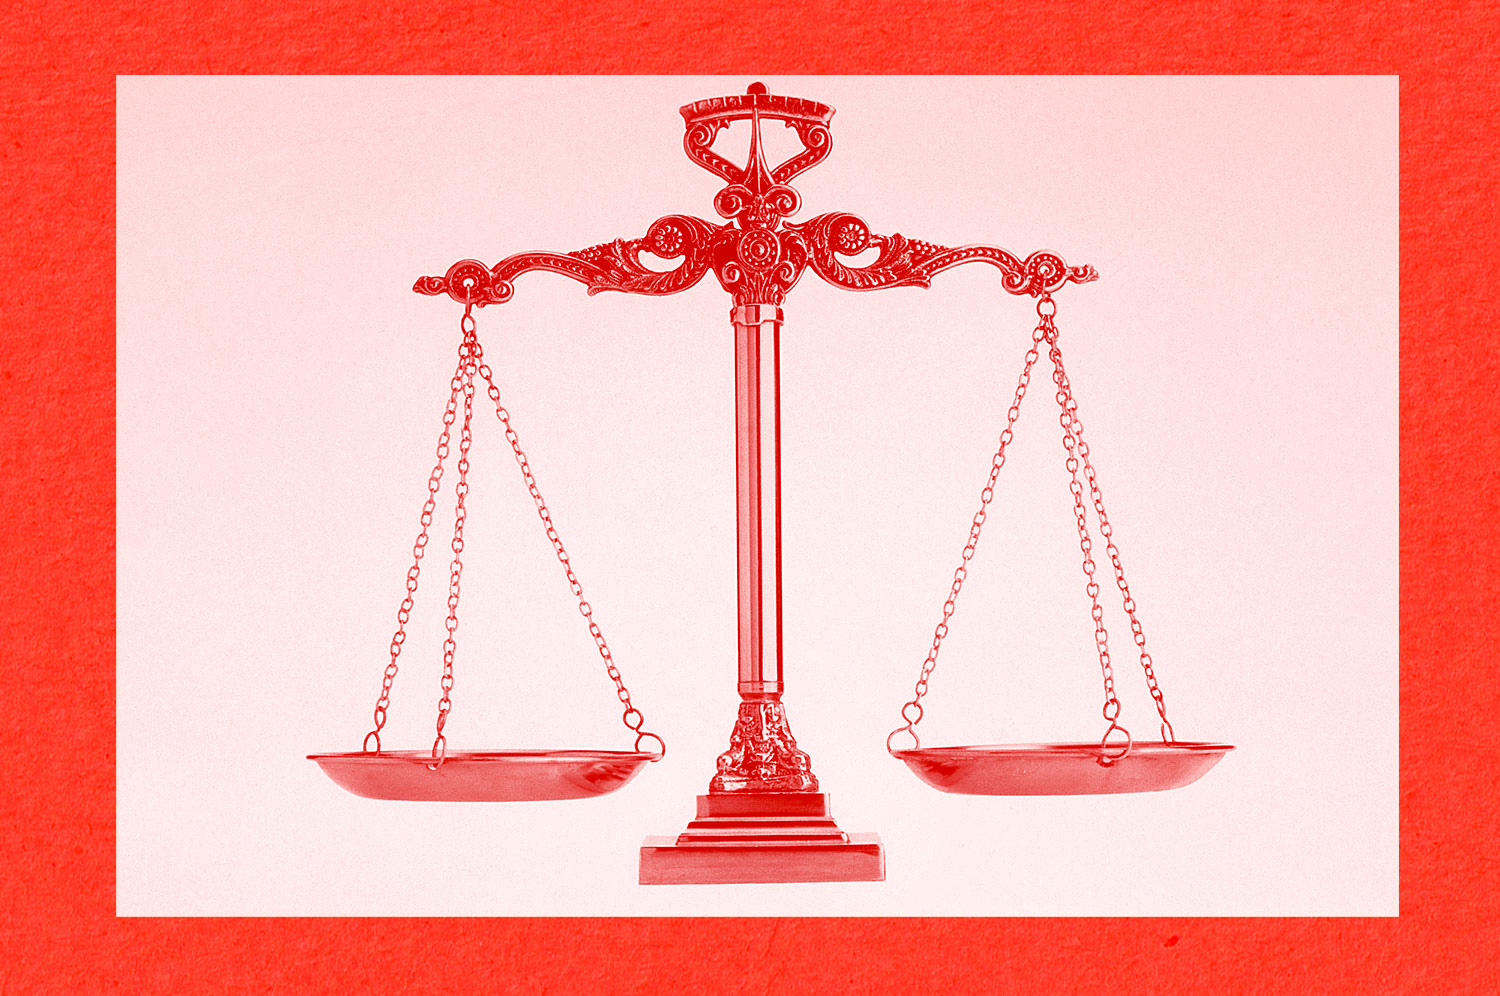 The scales of justice are evenly balanced in a red-tinged image.